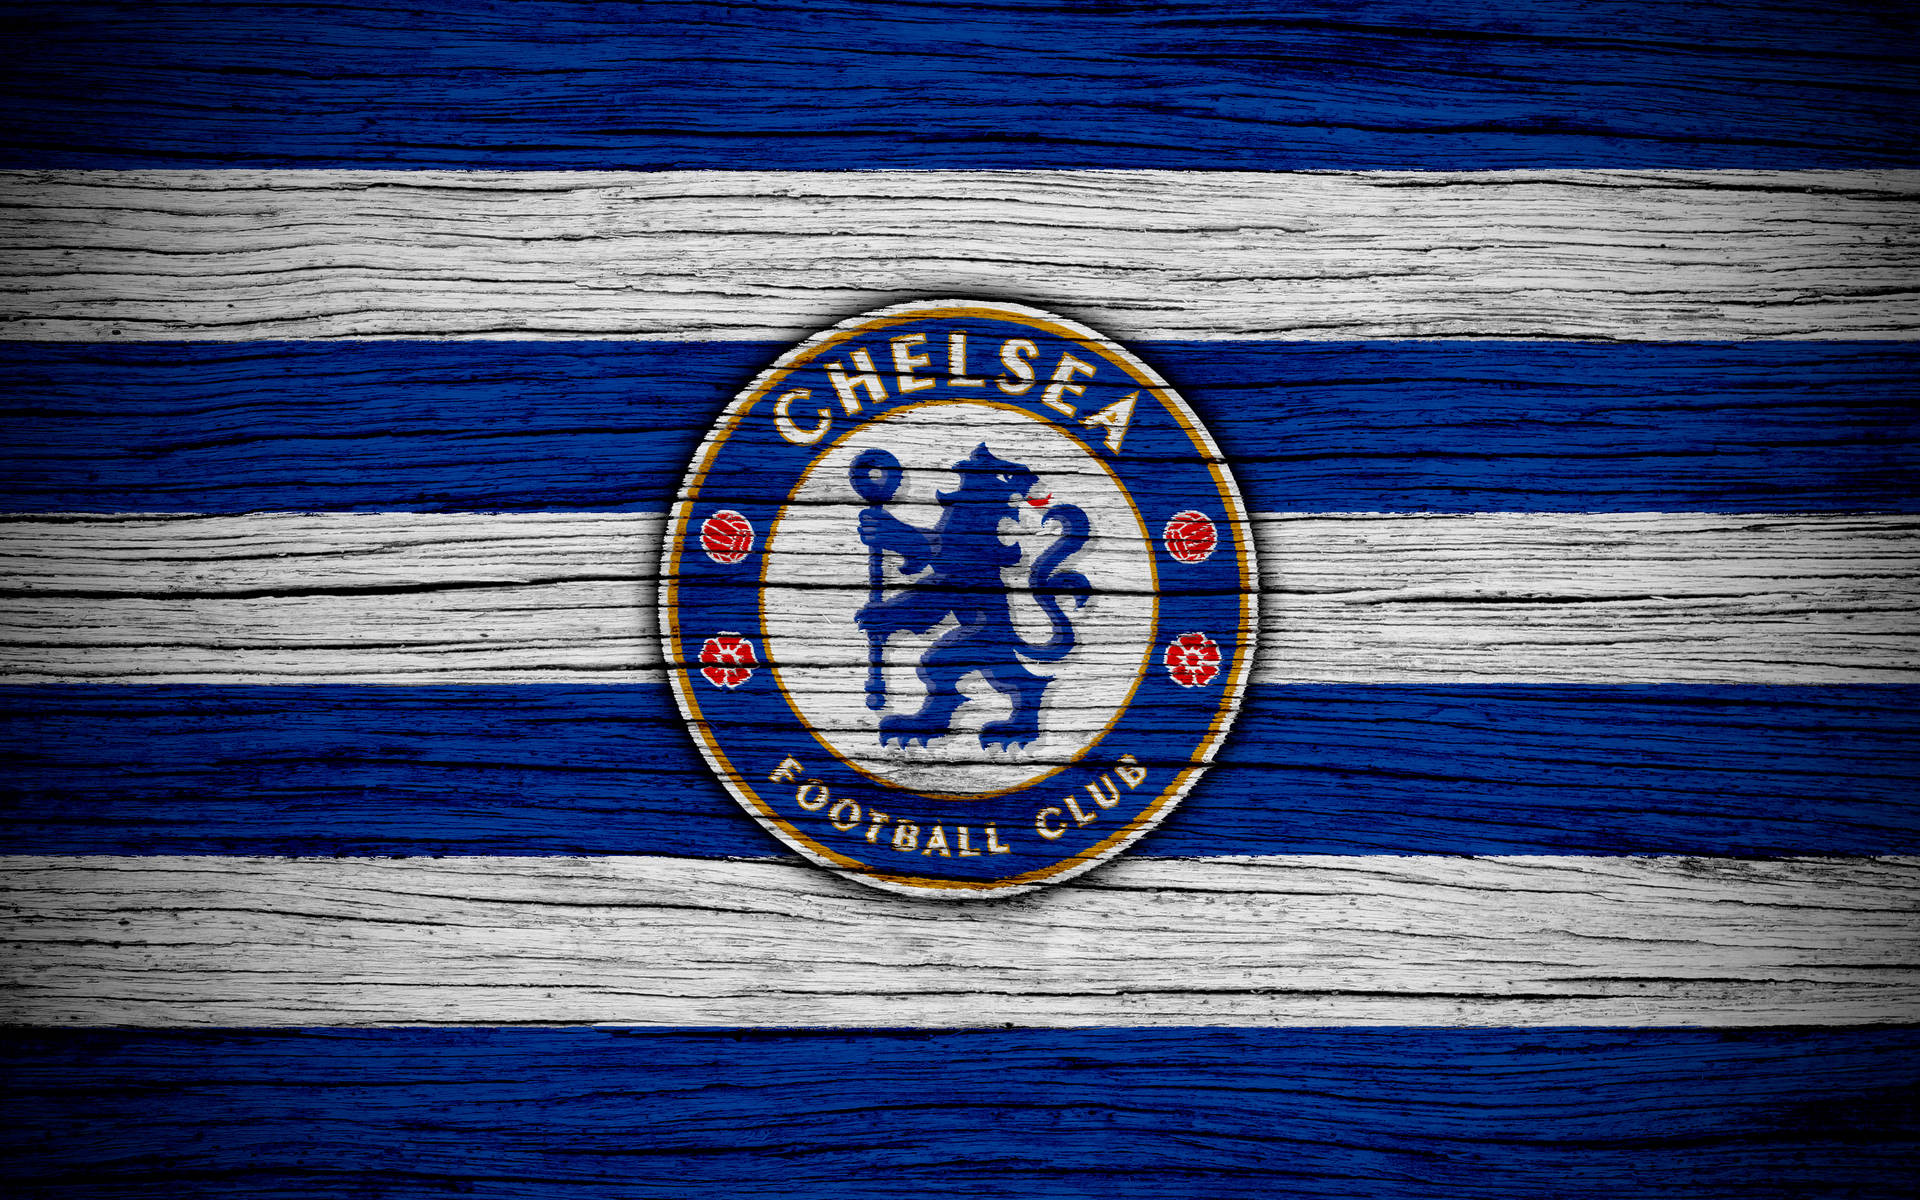 Chelsea Fc Logo On Striped Wood Background